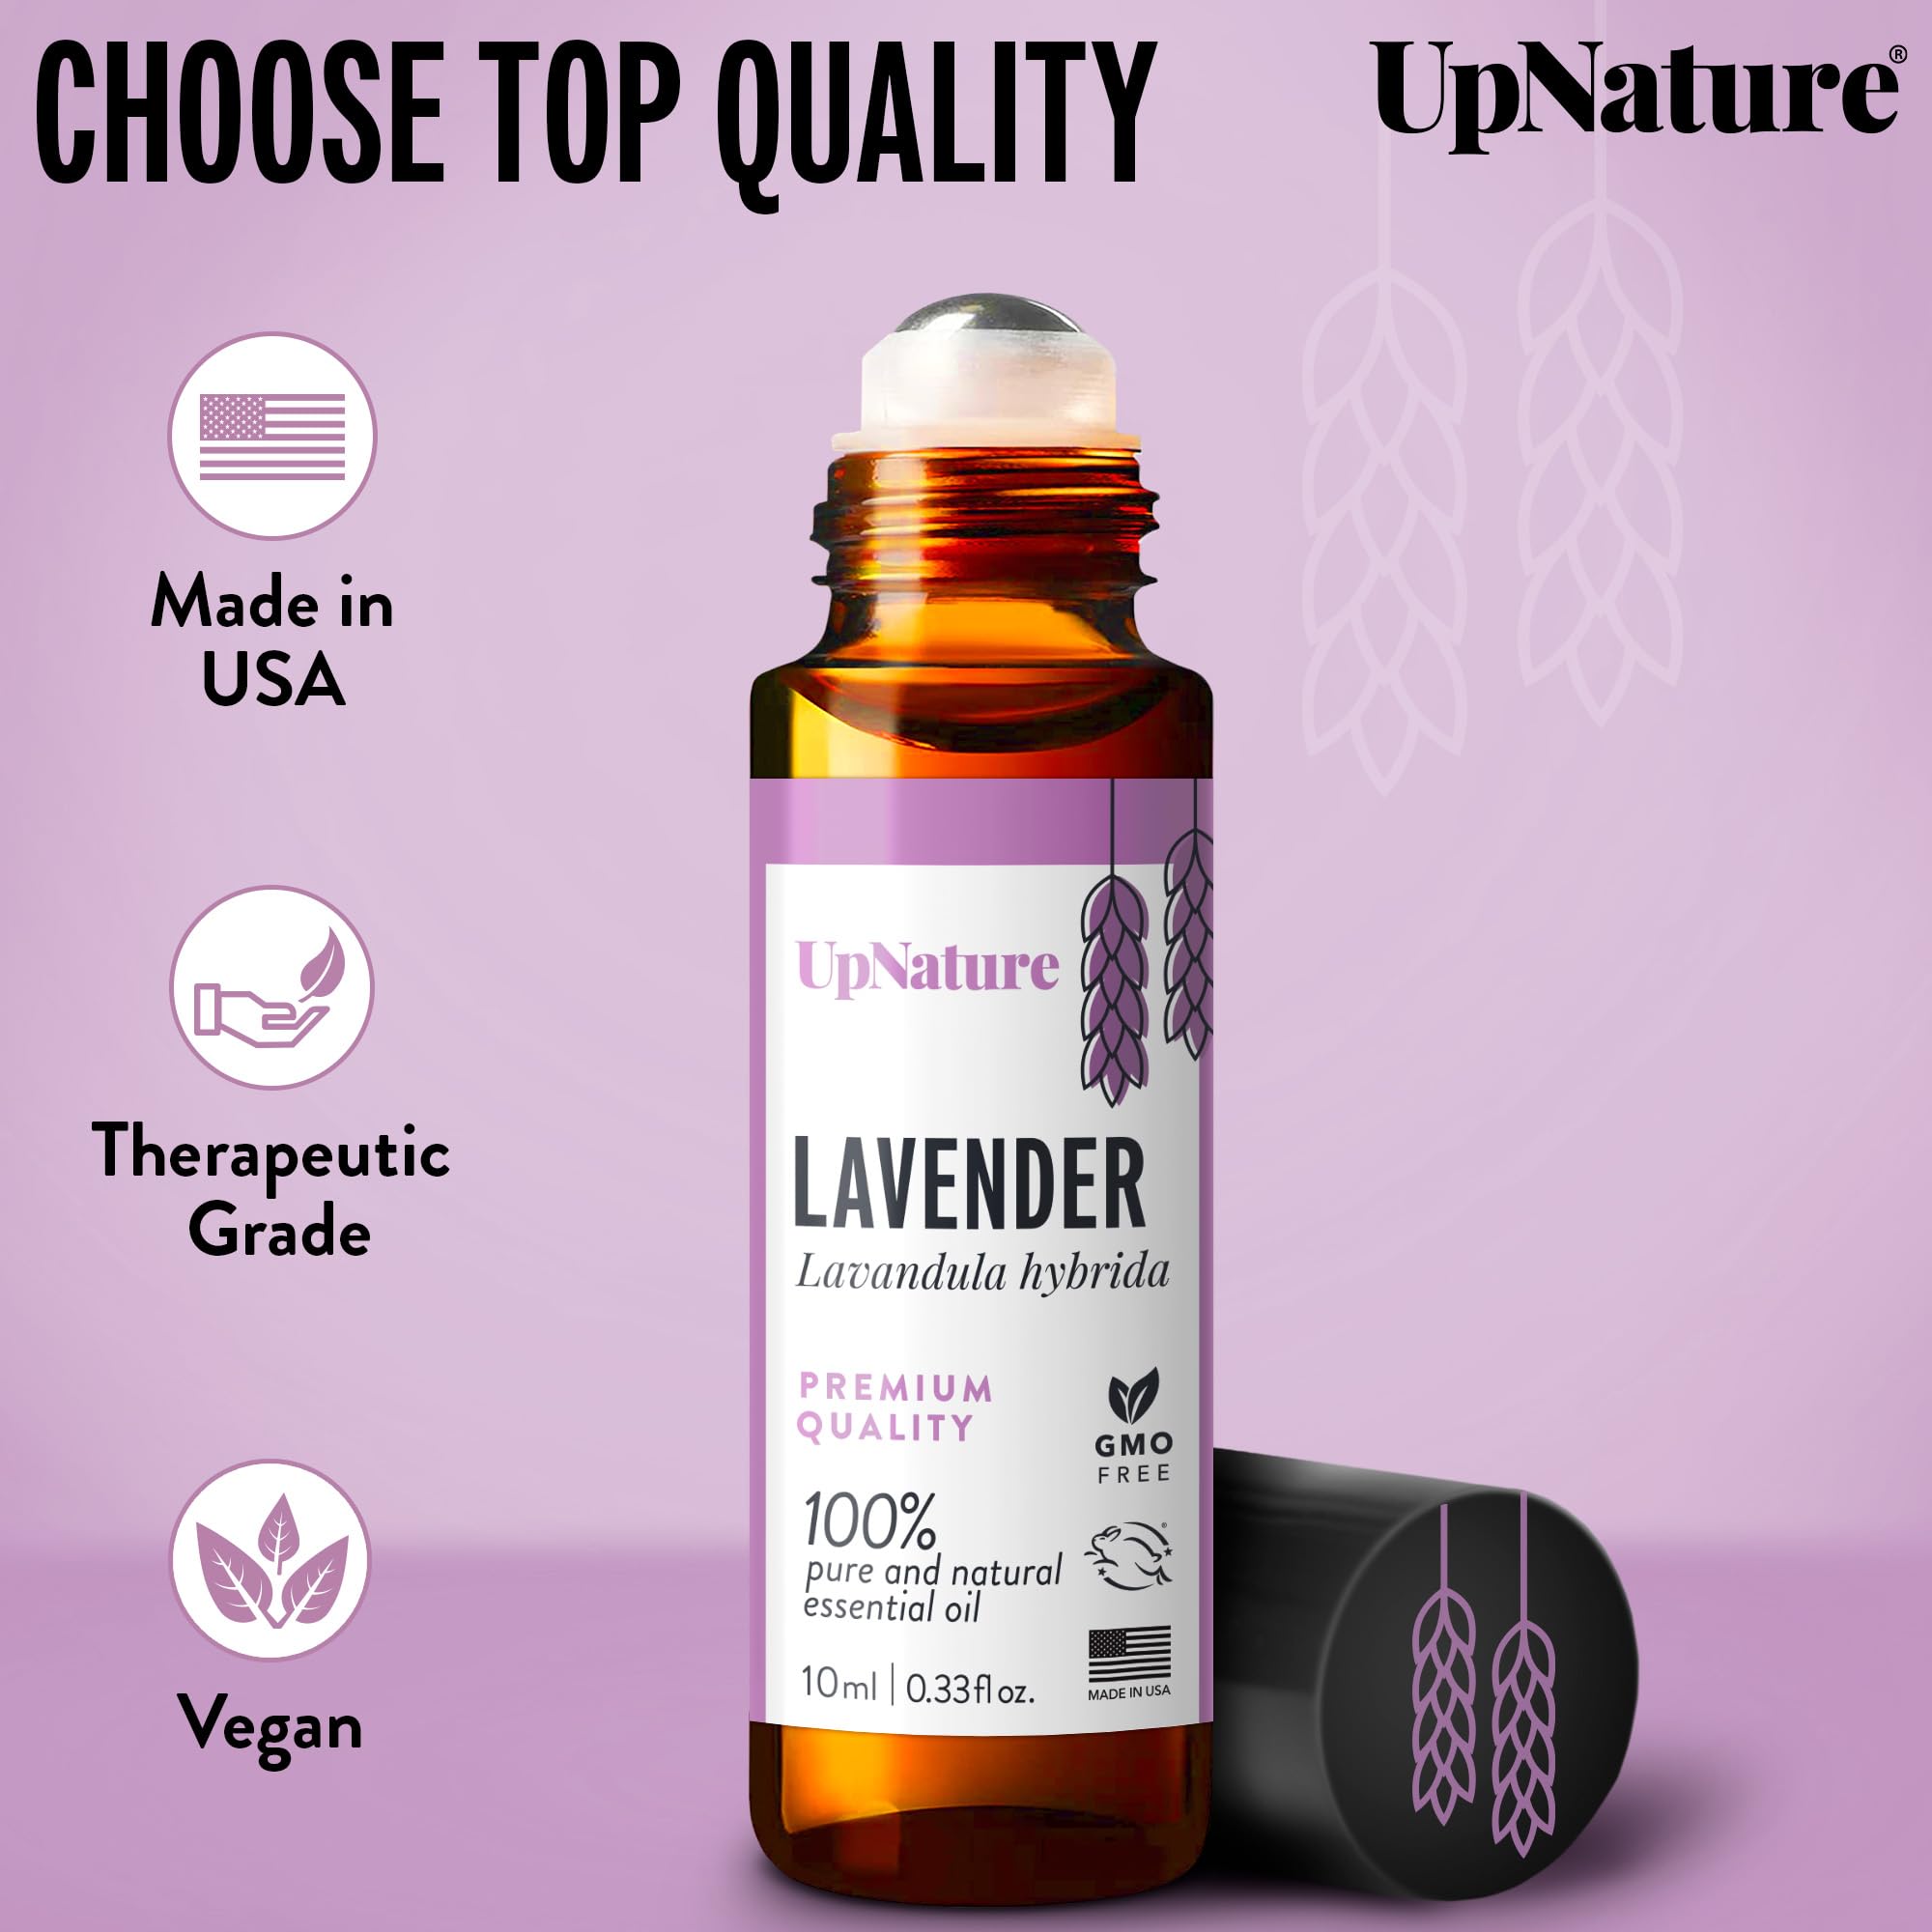 Lavender Essential Oil Roll On by UpNature - Aromatherapy Lavender Oil for Sleep, Stress Relief, & Relaxation